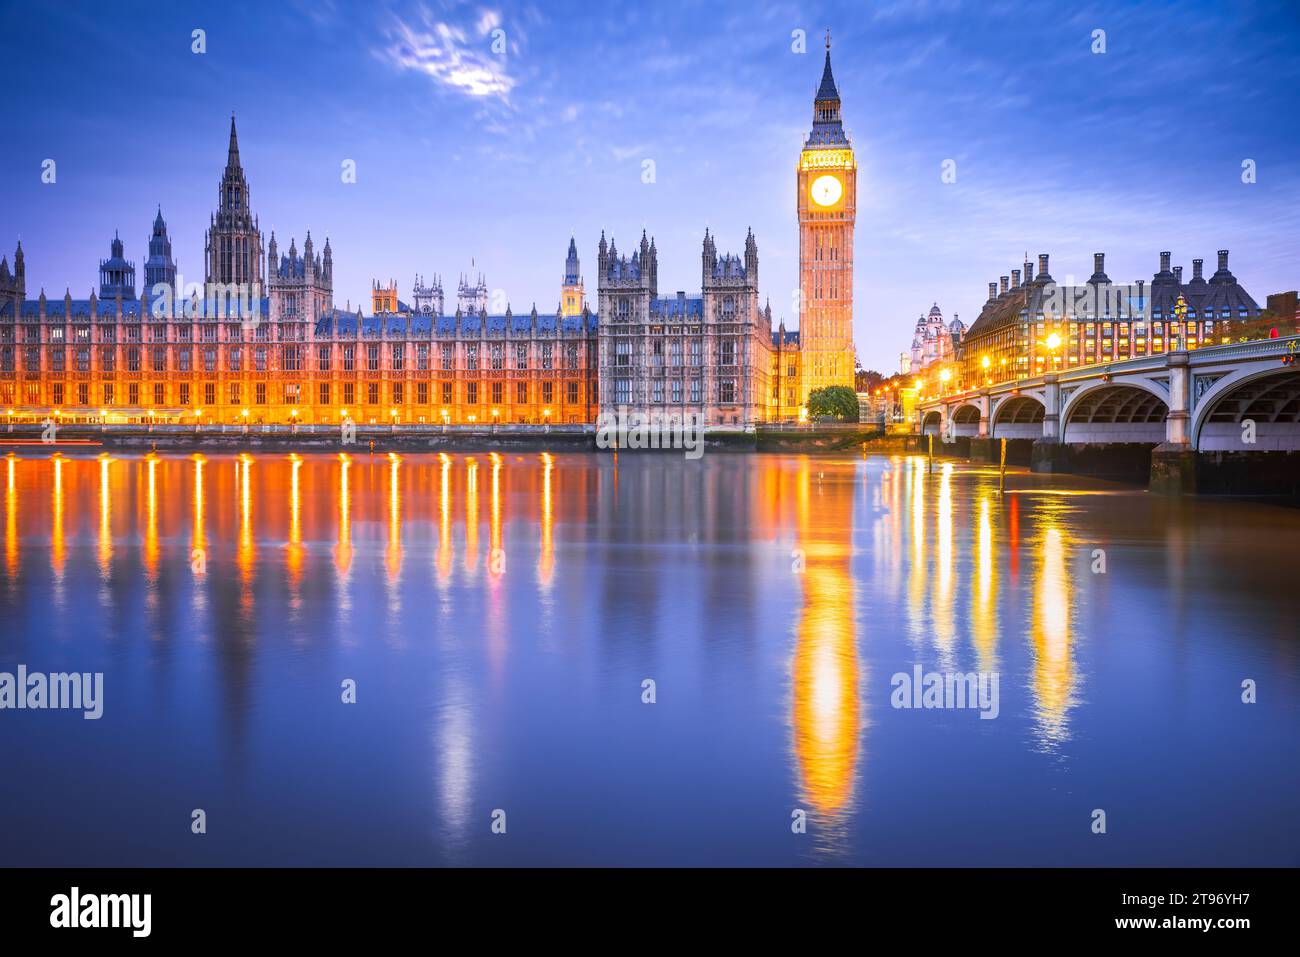 London, United Kingdom. Westminster Bridge, Big Ben and House of Commons building in background, travel english landmark at blue hour. Stock Photo